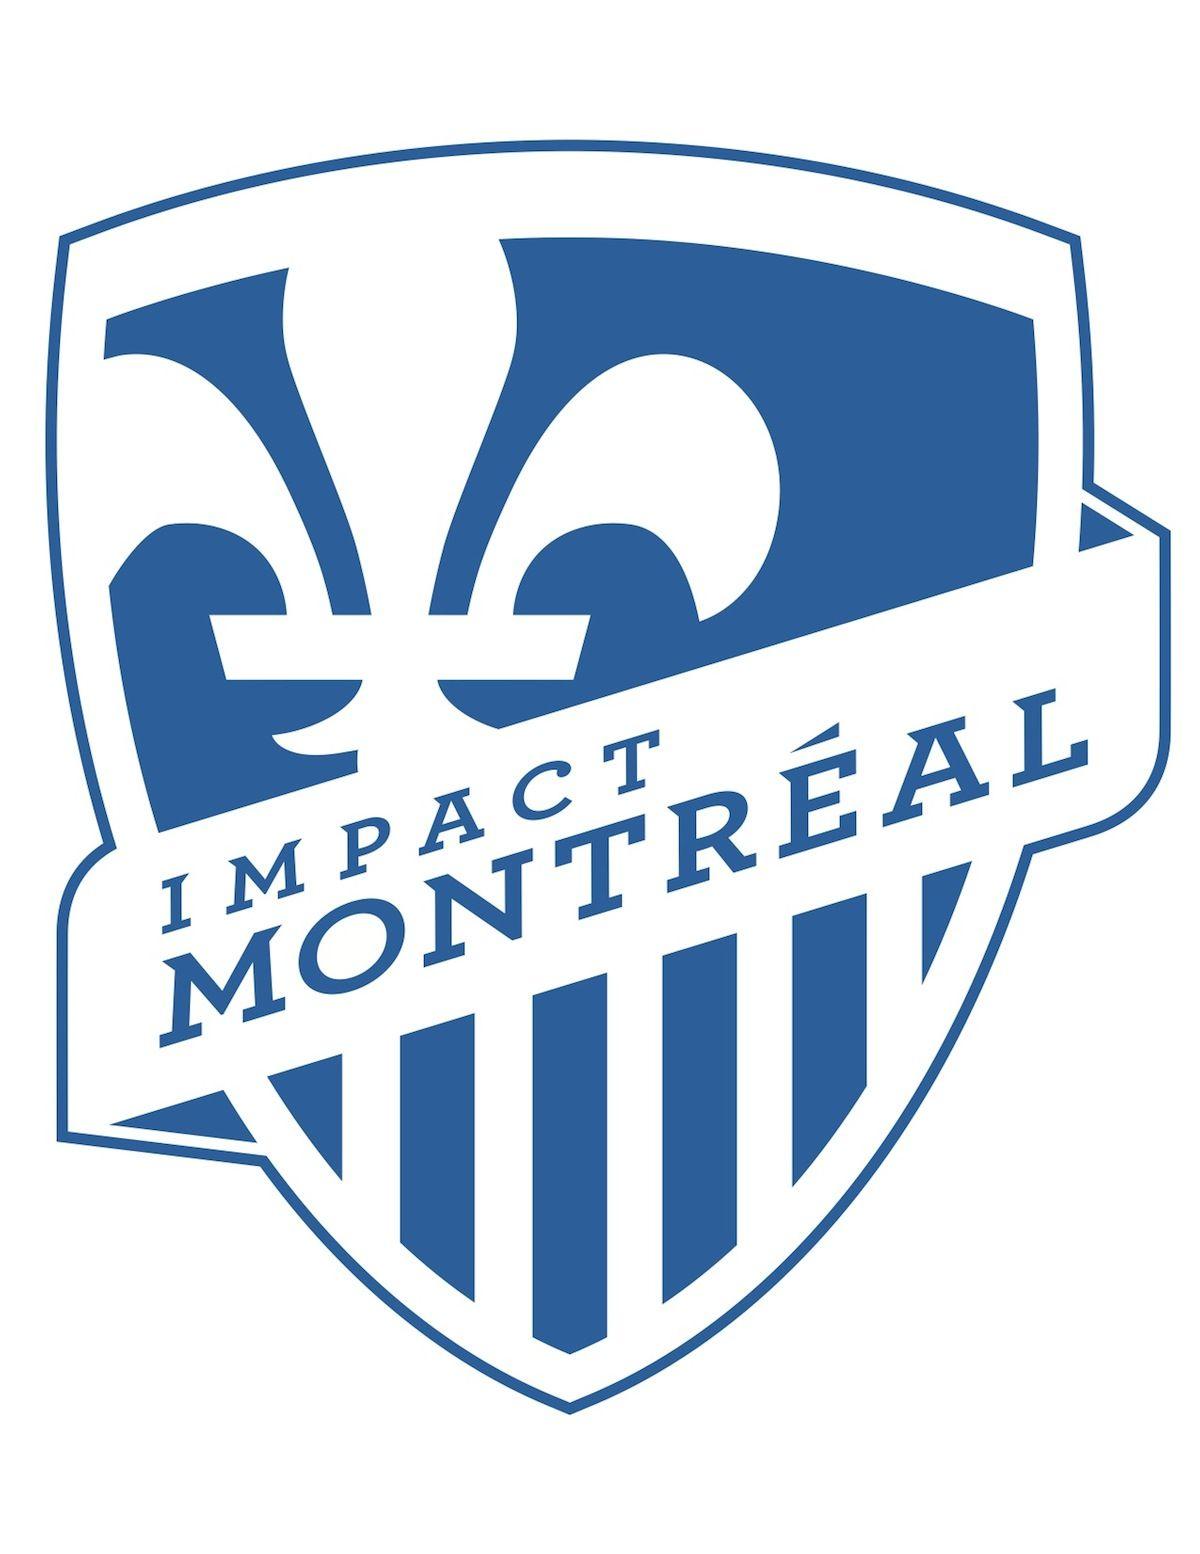 Montreal Impact Logo - Download your Montreal Impact pumpkin carving stencils